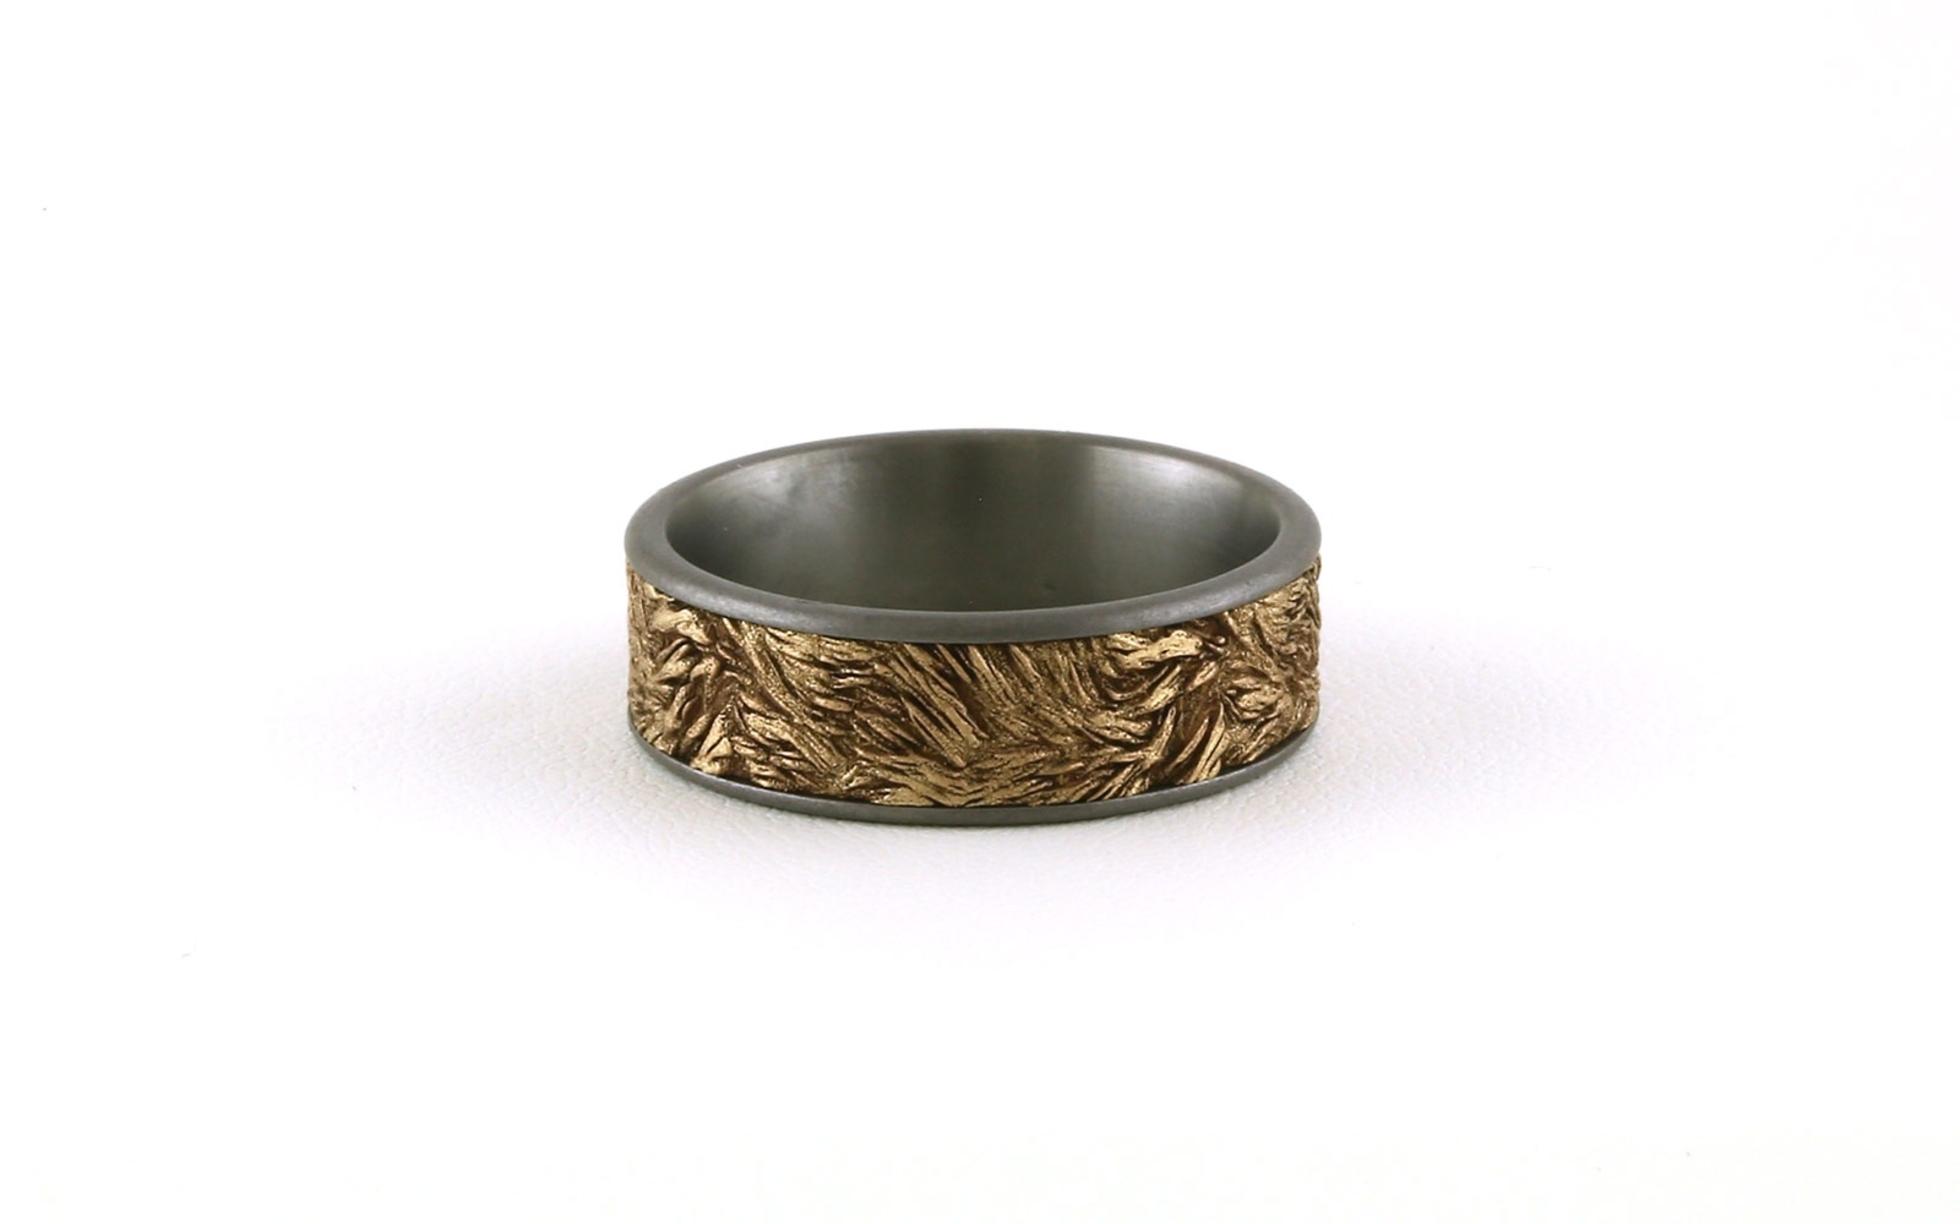 Flat Comfort Fit Wedding Band with Lion's Mane Texture Center in Yellow  Gold and Grey Tantalum Edge (sz 10)